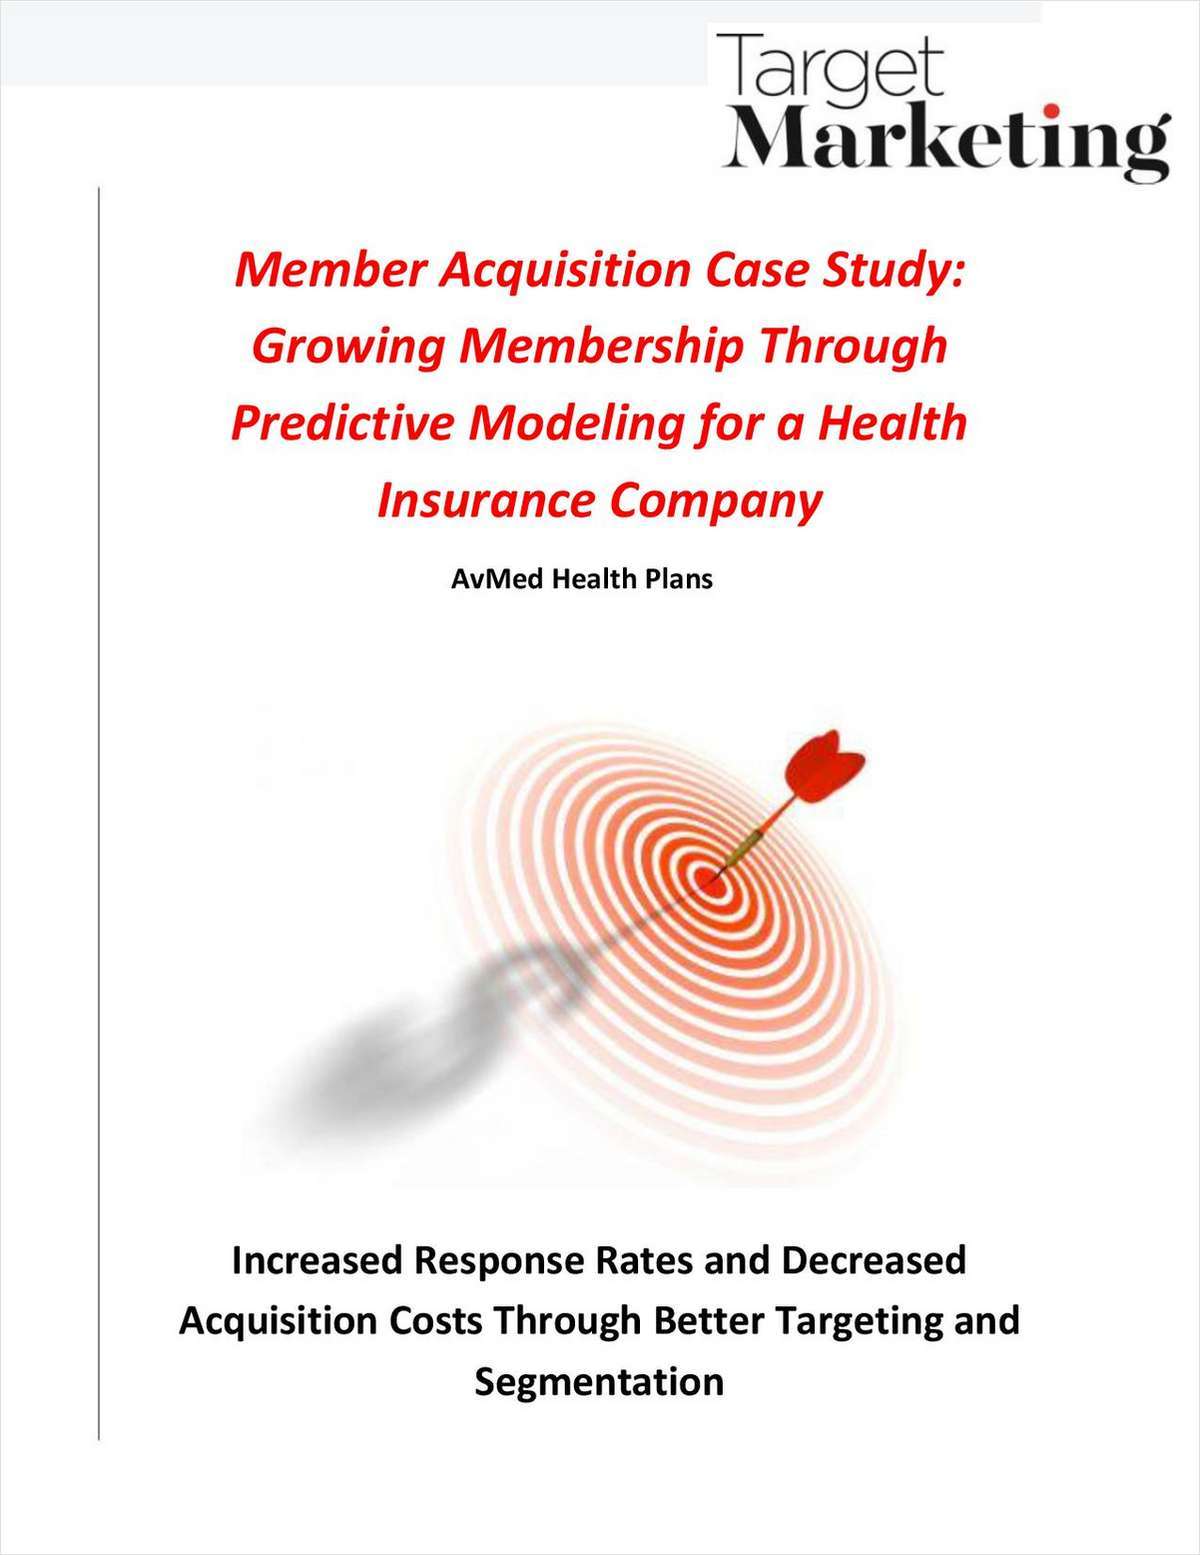 Member Acquisition Case Study: Growing Membership Through Predictive Modeling for a Health Insurance Company